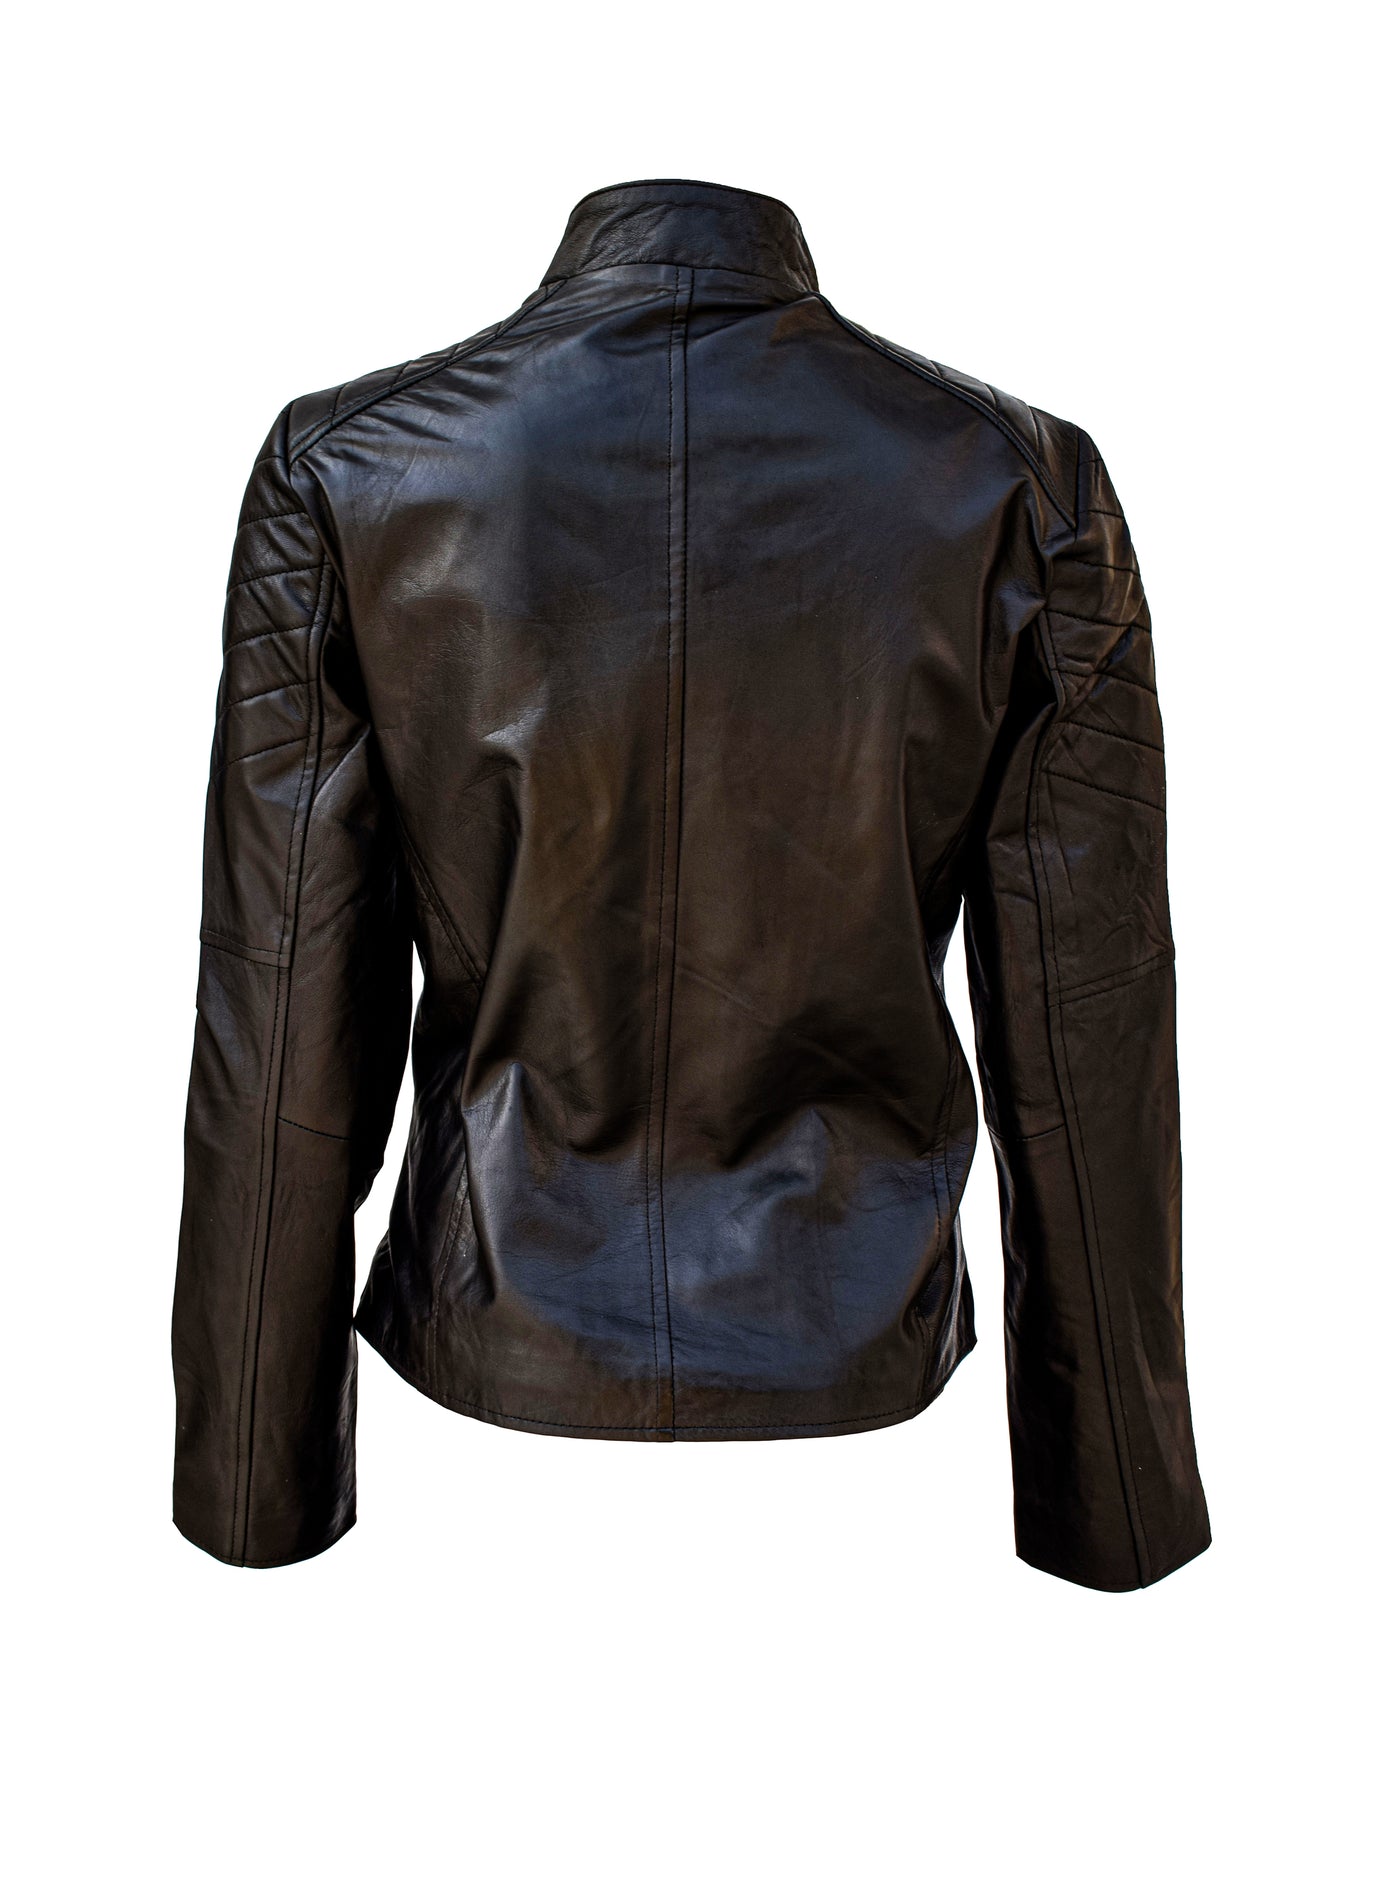 Womens Black Leather Jacket For Sale